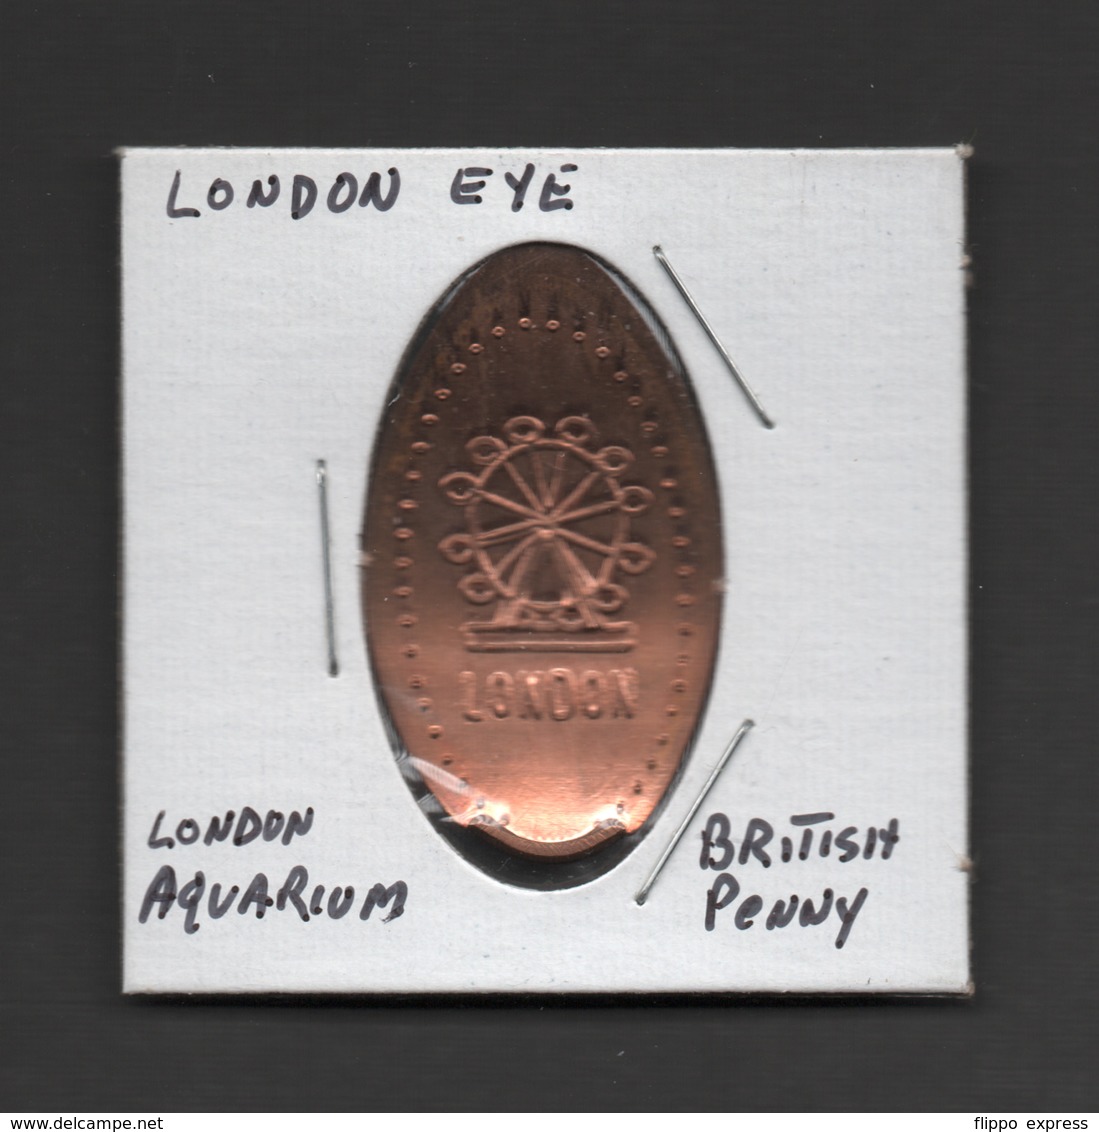 Pressed Penny, Elongated Coin, London Eye, England - Elongated Coins